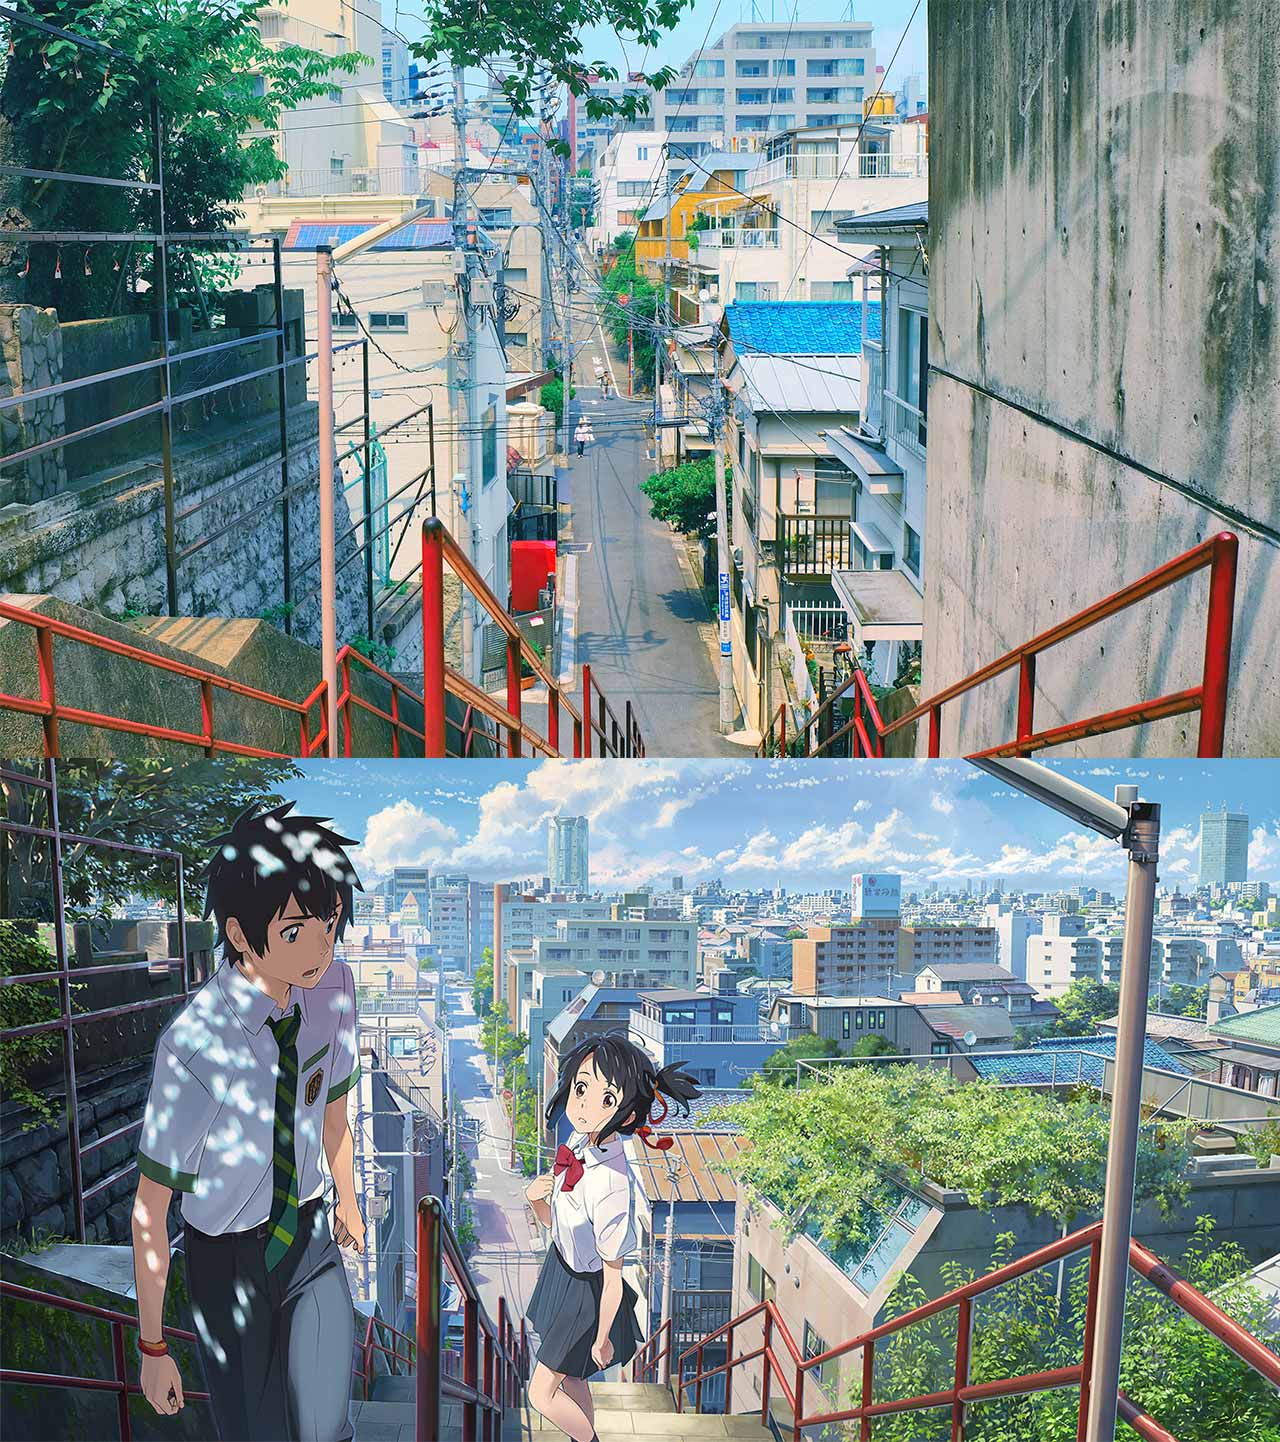 Your Name’s Anime Locations Compared With The Real-World Ones